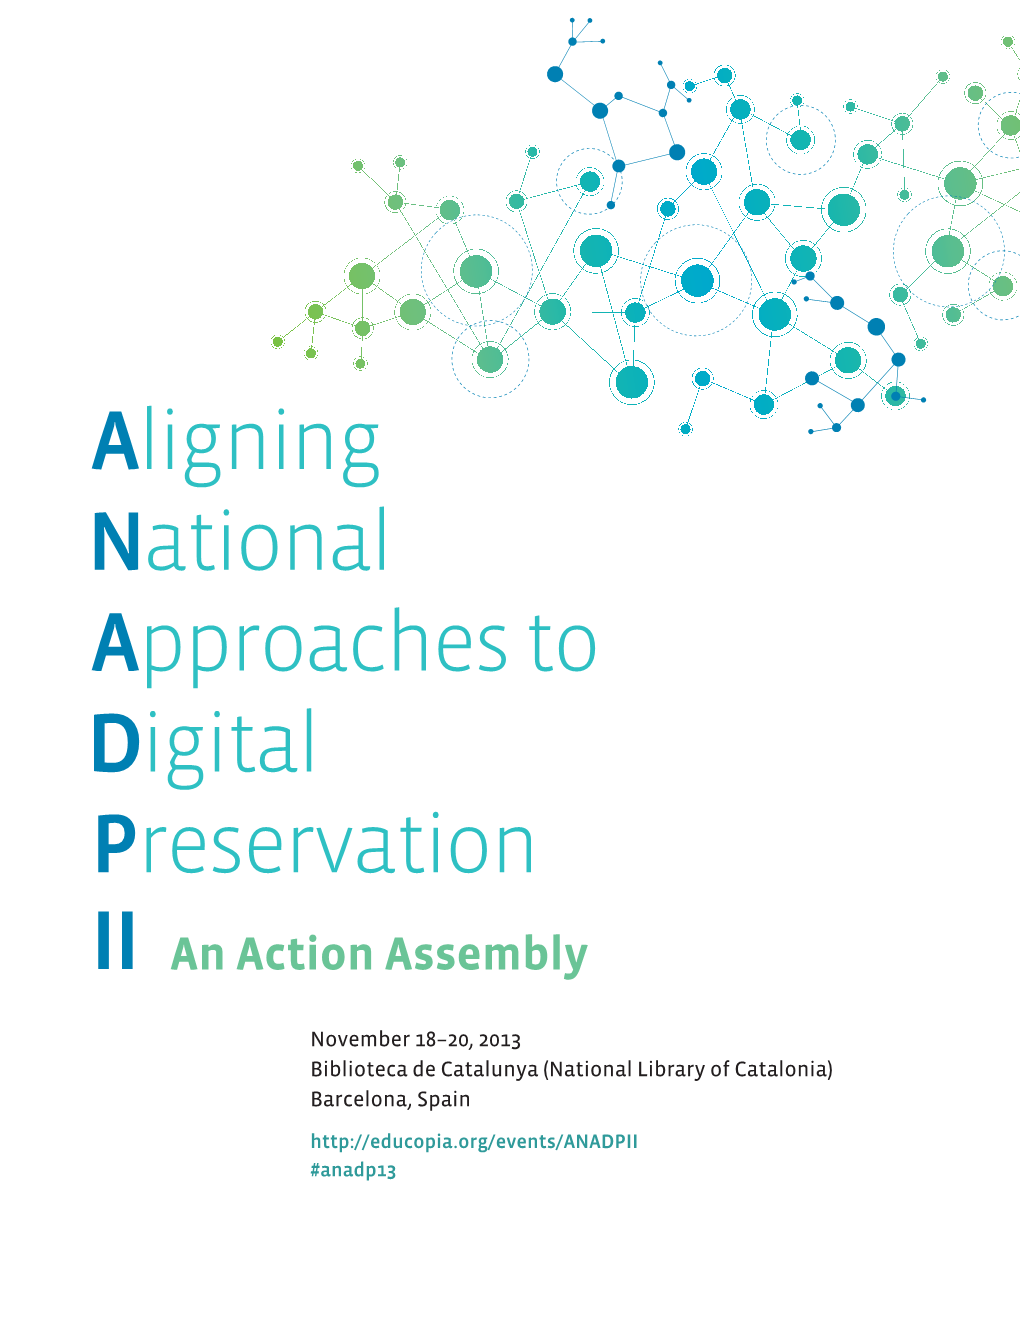 Aligning National Approaches to Digital Preservation II an Action Assembly